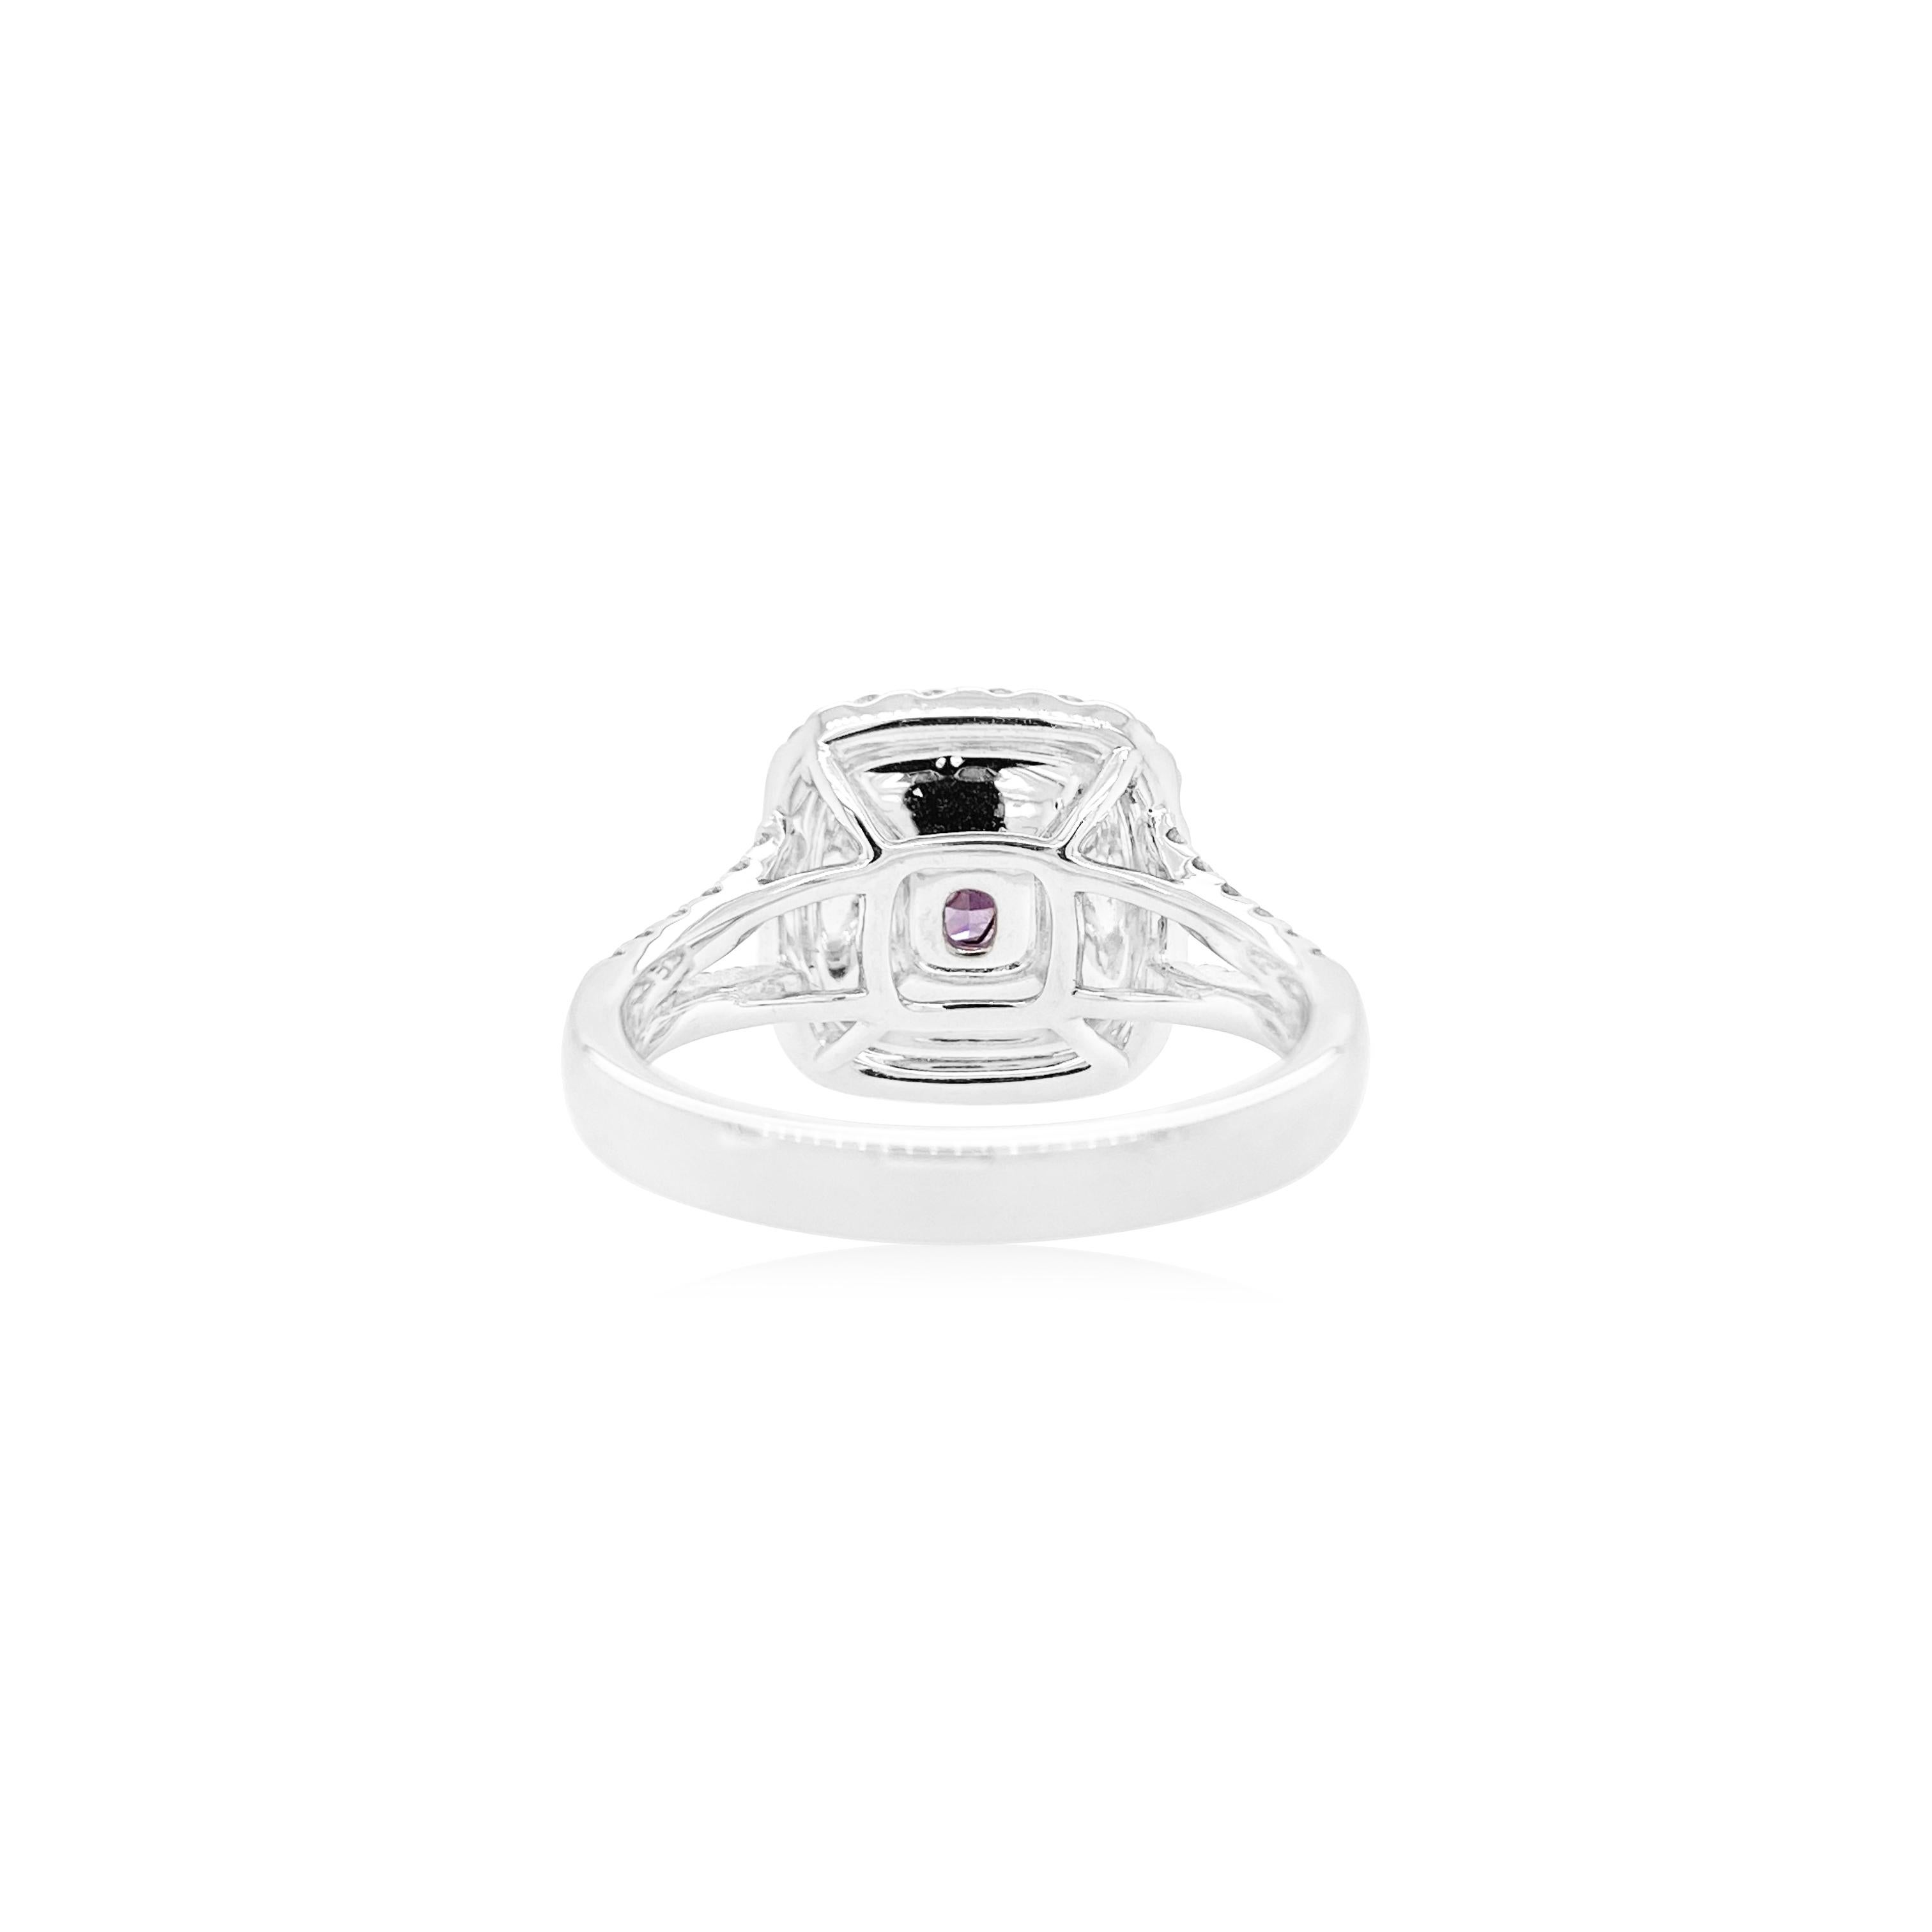 Radiant Cut Cocktail Ring with a Pinkish Purple Diamond and White diamonds